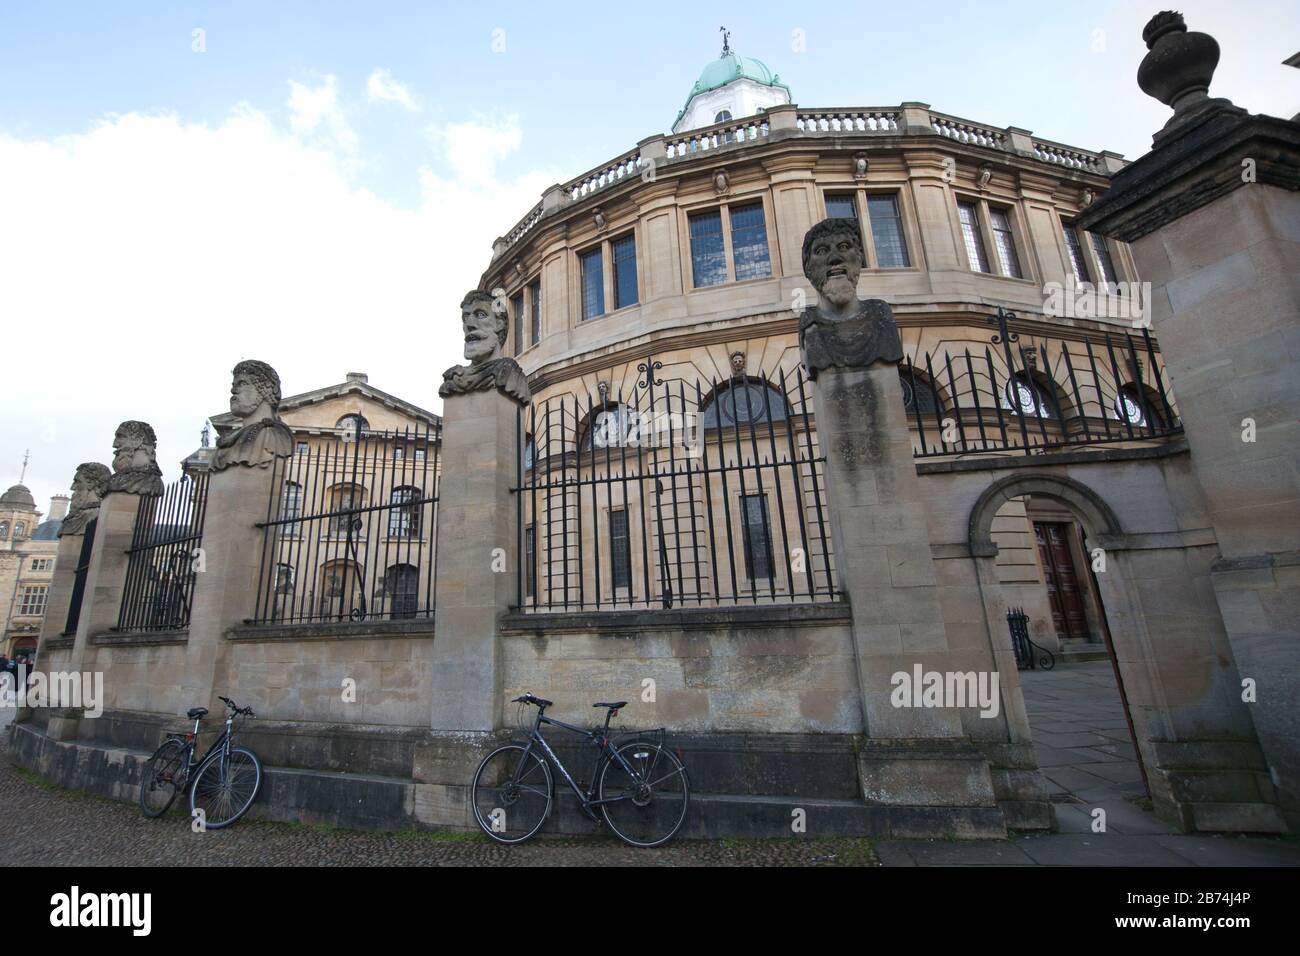 Oxford, Oxfordshire, UK 03 09 2020 The Bodleian Library in Oxford UK Stock Photo